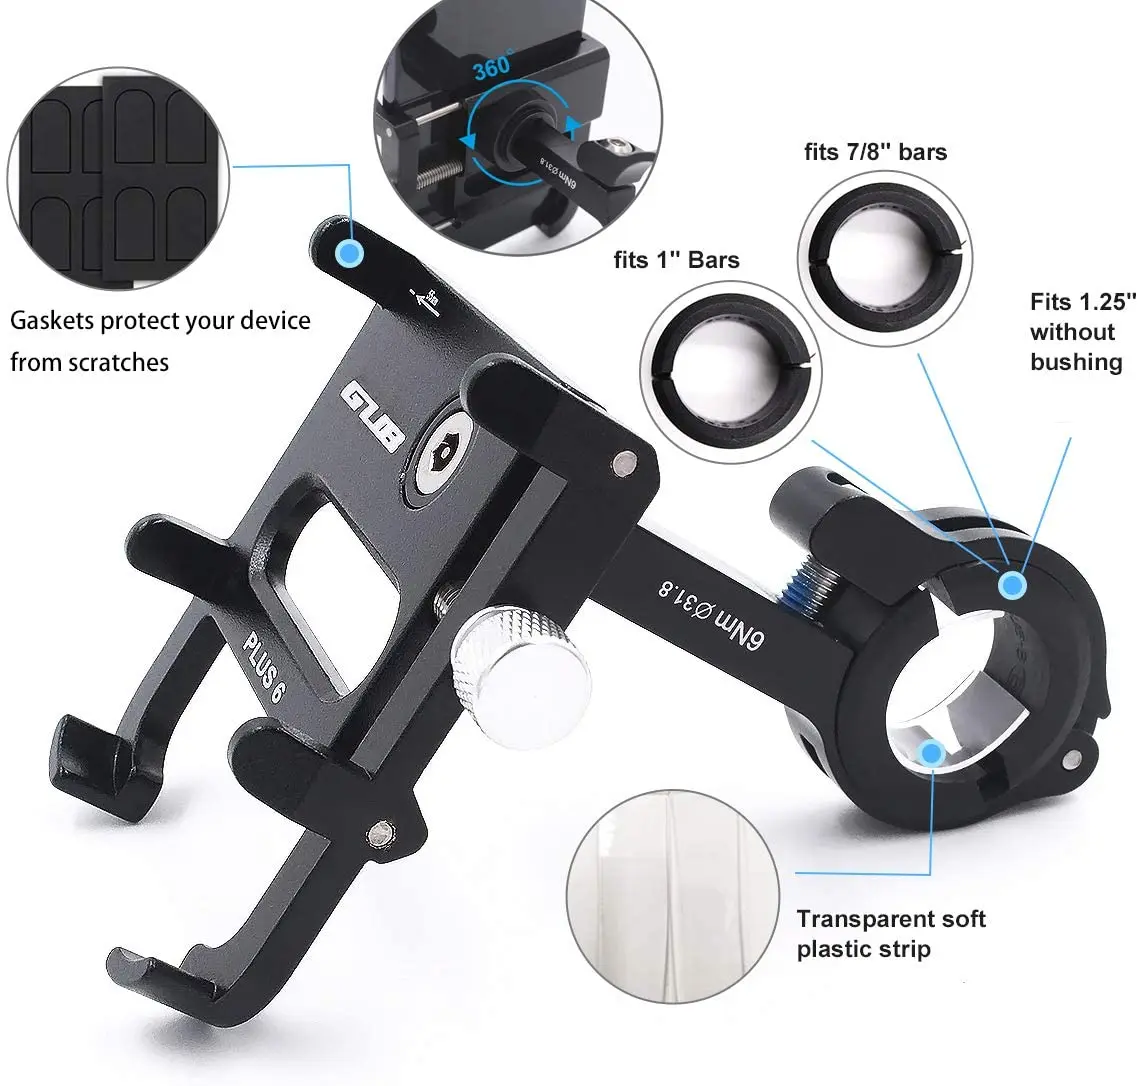 GUB Plus 6H Bicycle & Motorcycle Phone Mount Black Aluminum Alloy Bike Phone Holder with 360° Rotation for iPhone 11 Pro Max X XR Xs 7s 8 Plus for Samsung Note10/9 GPS Mount 4.0 to 7 Inch 